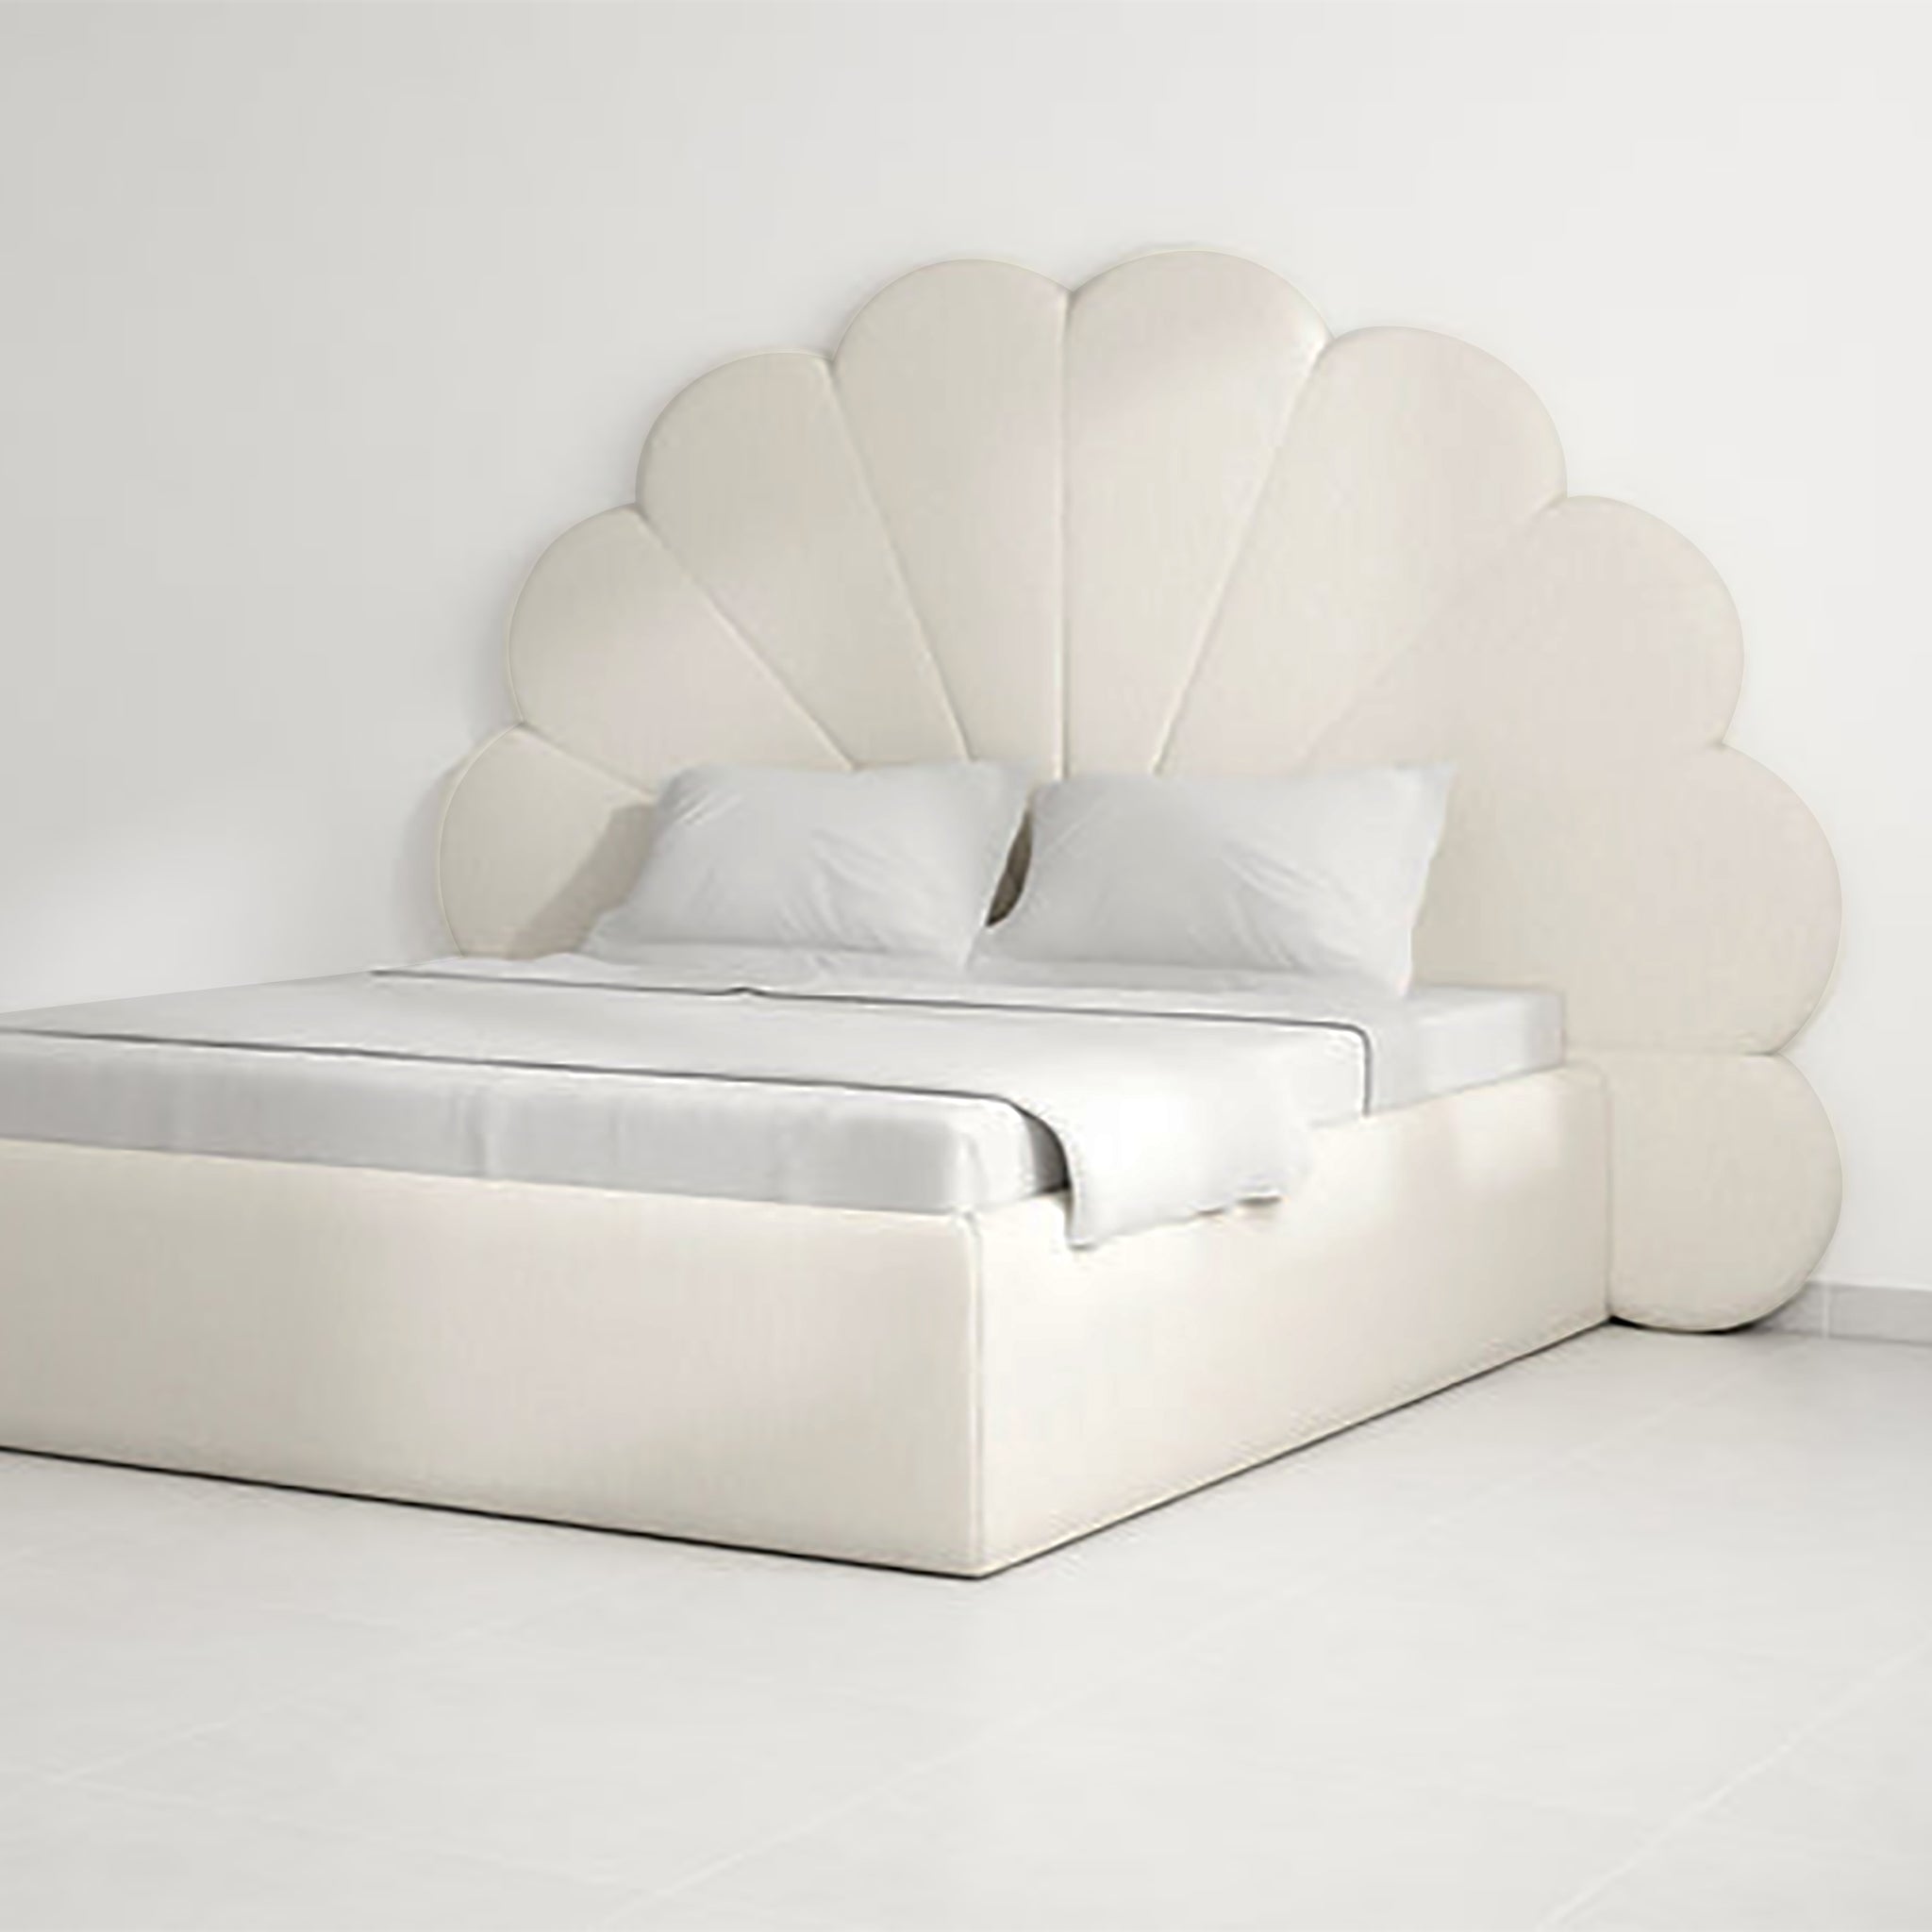 Sophisticated and stylish Kyle Bed with solid frame